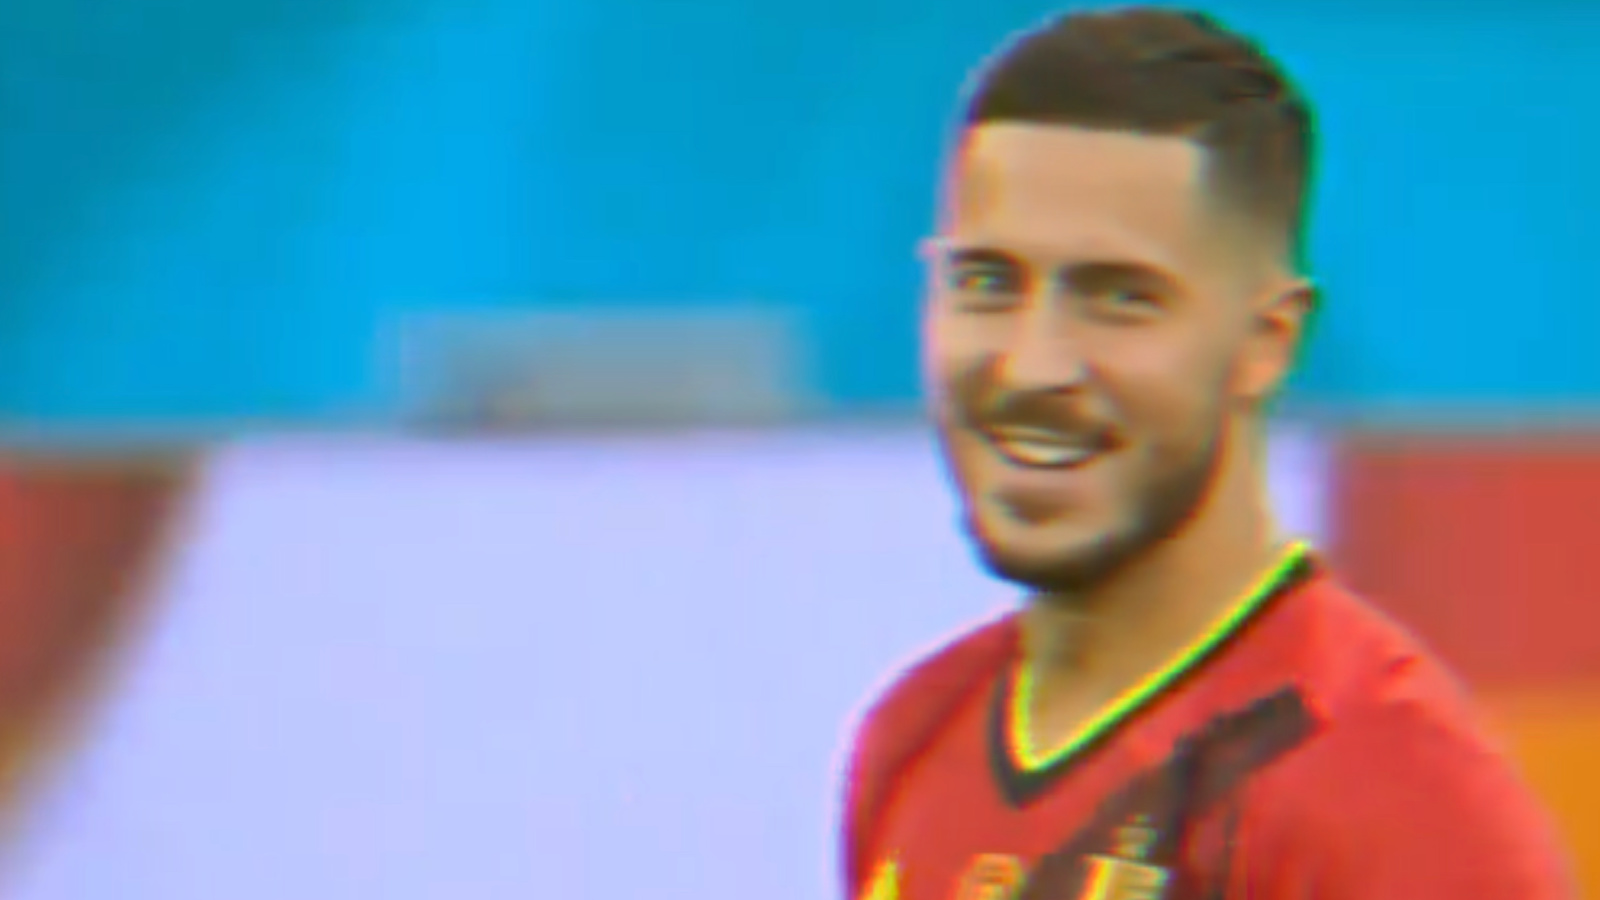 Eden Hazard having a light moment during his masterclass display against Portugal